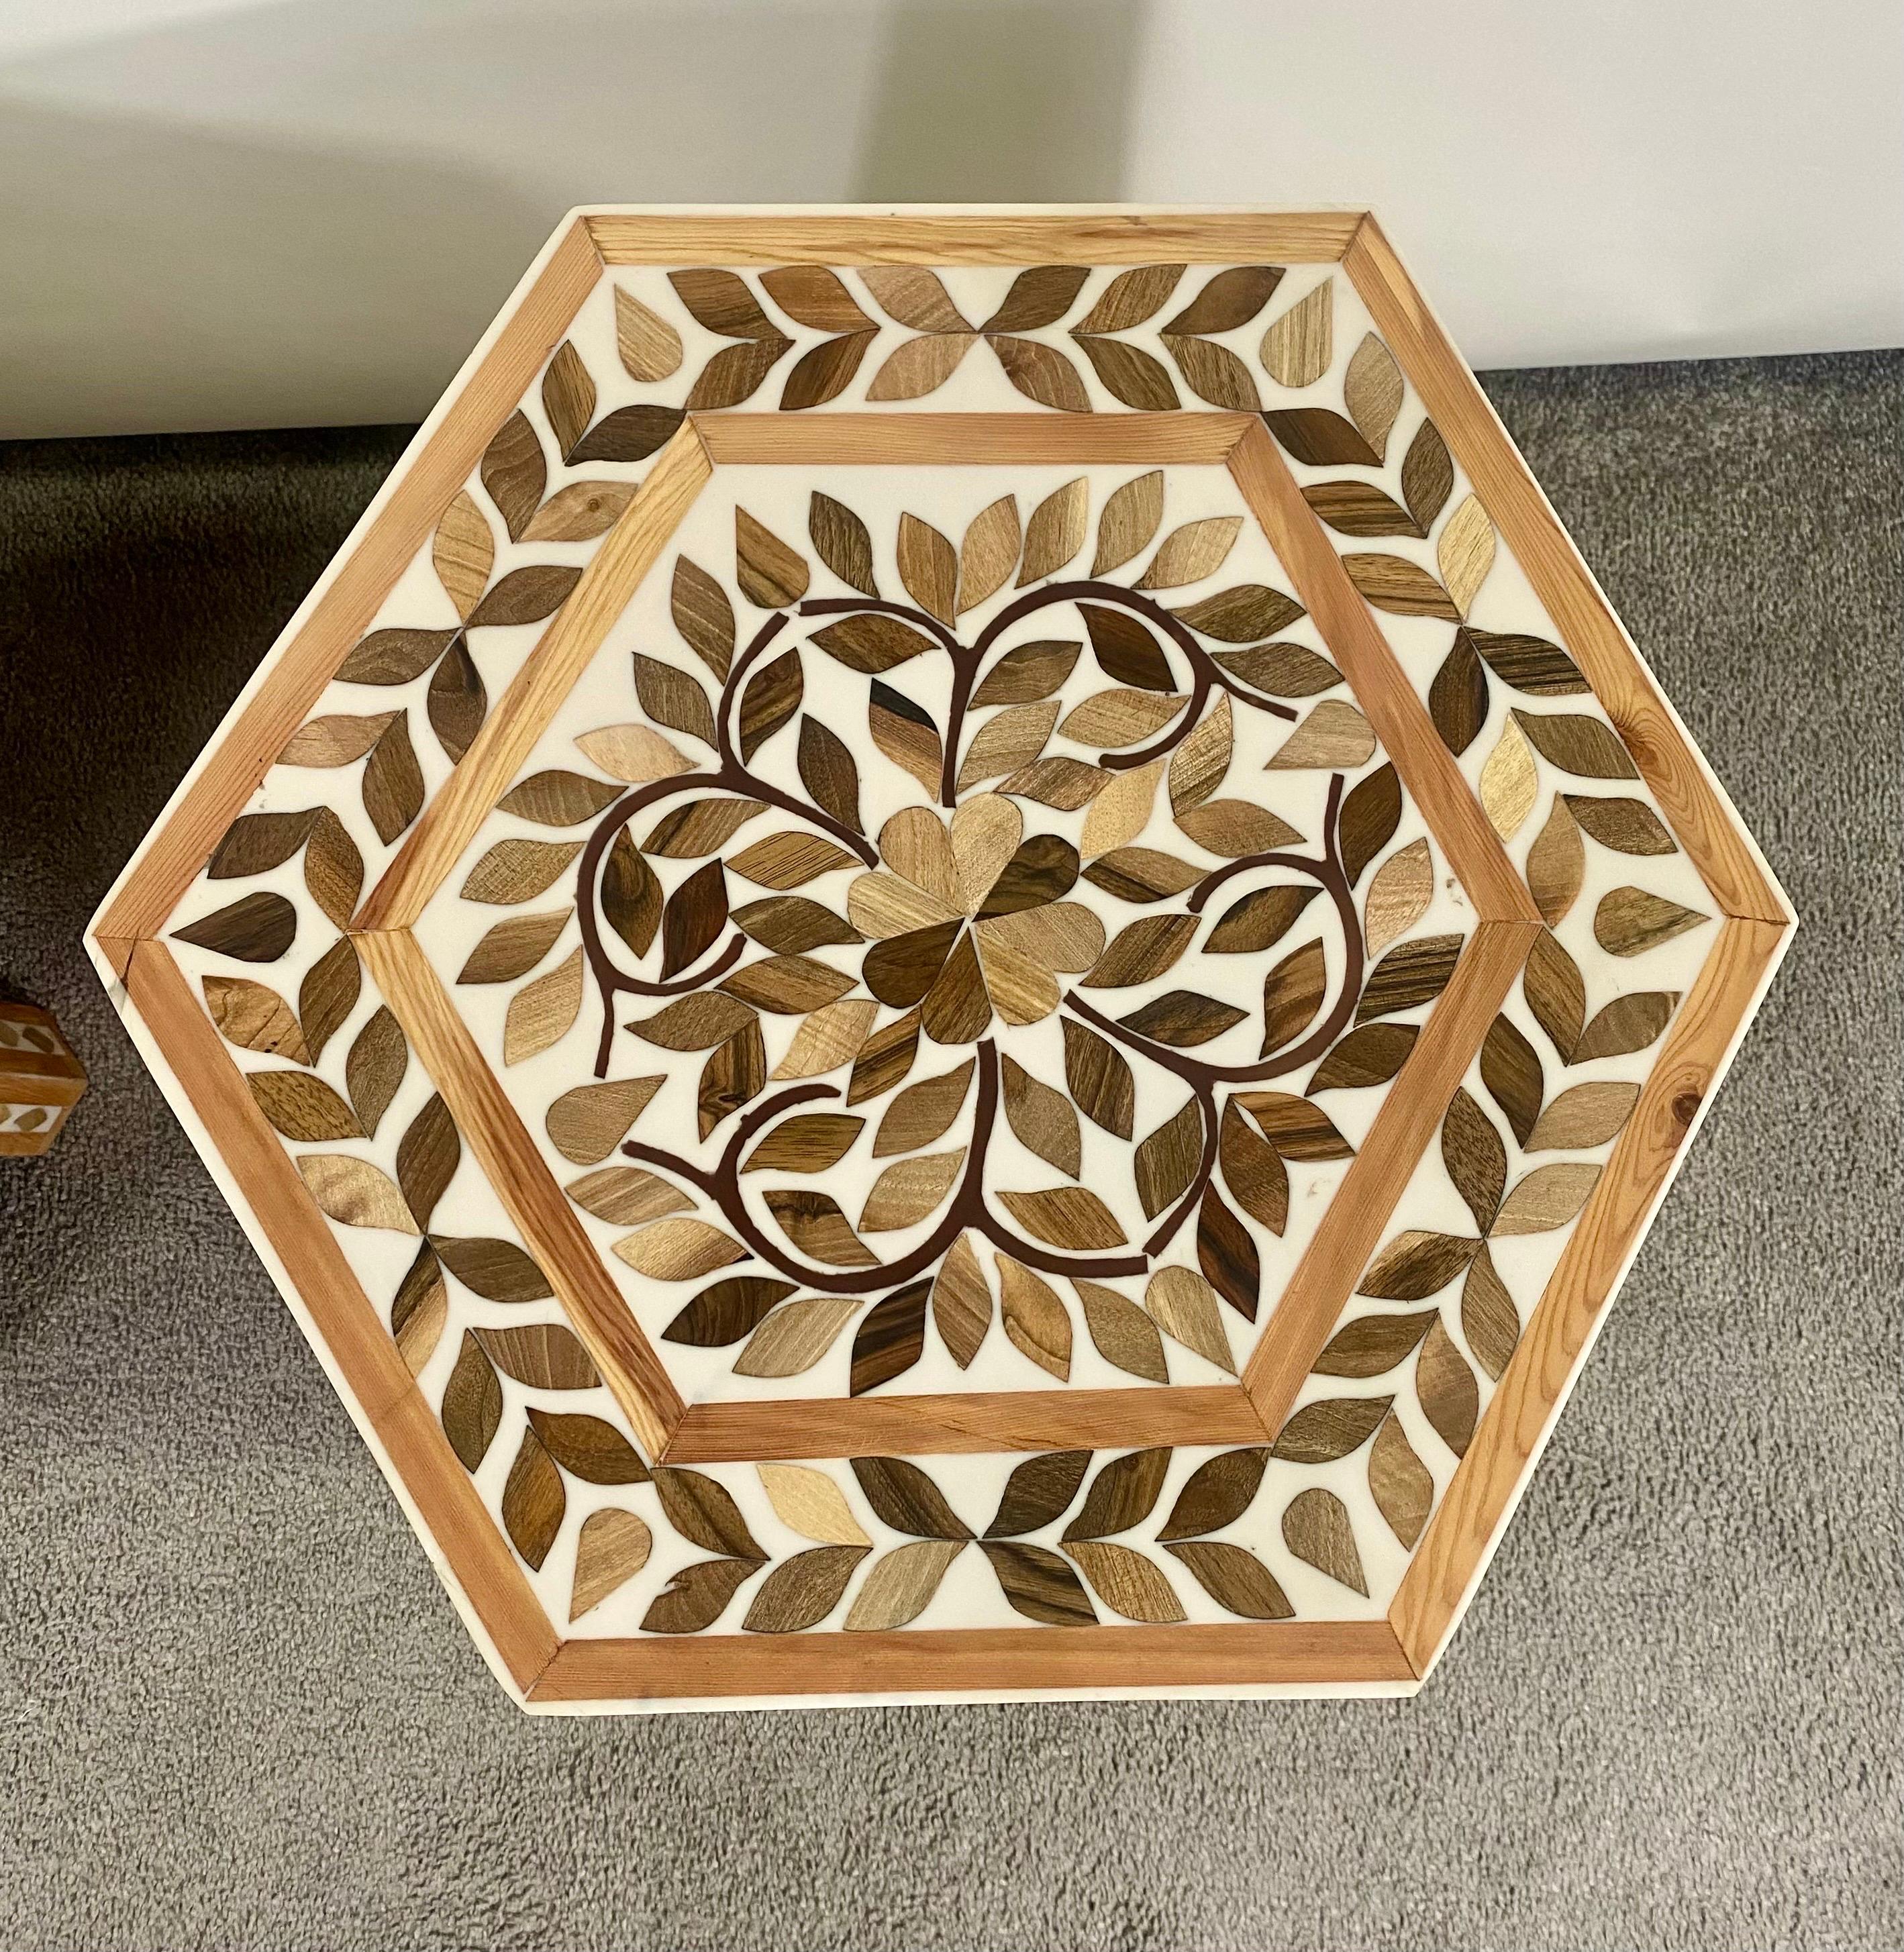 Boho Chic Leaf Design Resin & Walnut Hexagonal Side or End Table, Pair In Good Condition For Sale In Plainview, NY